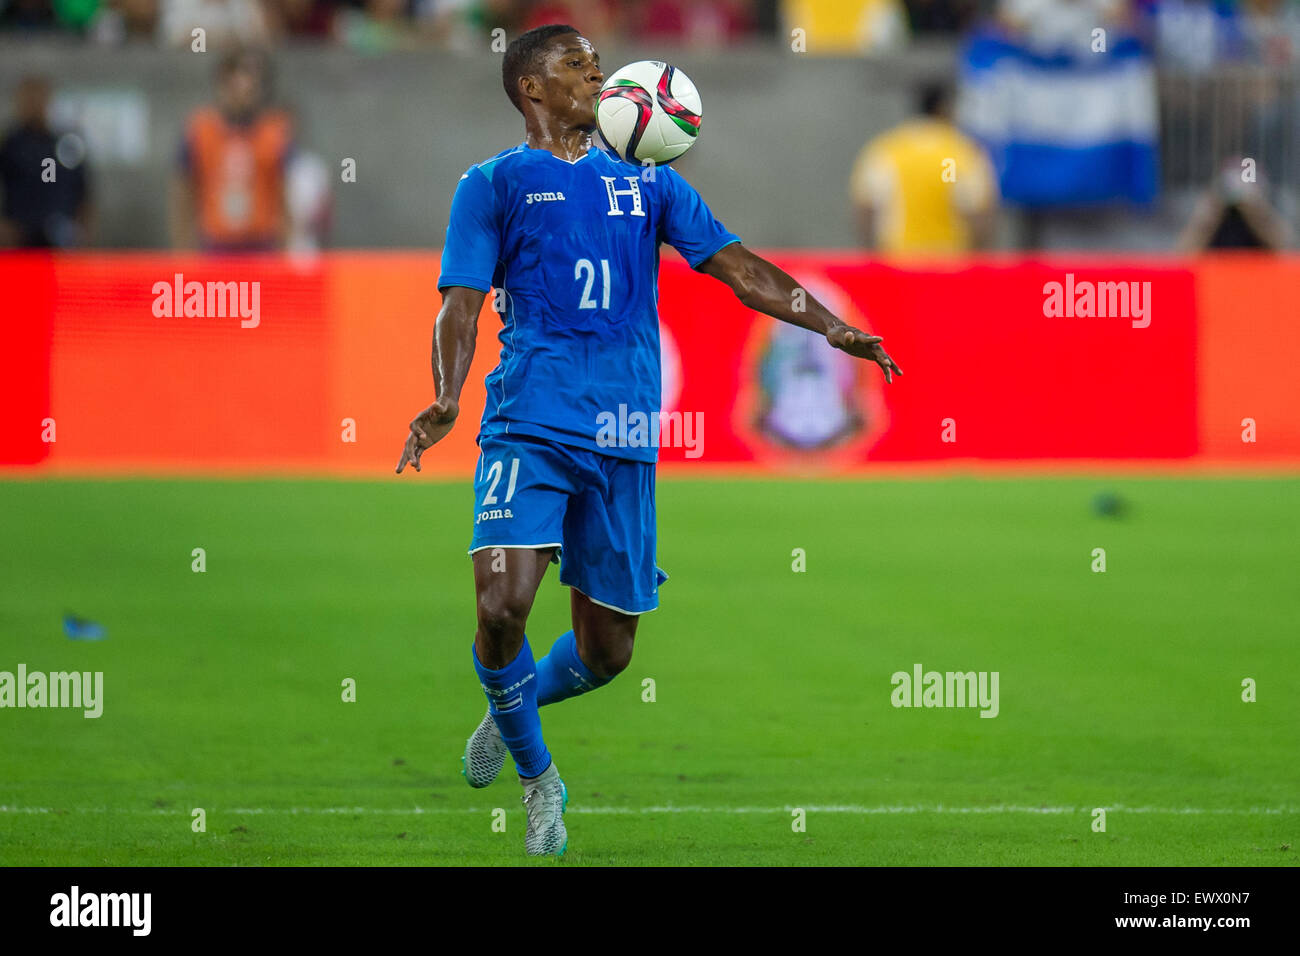 July 1, 2015: Honduras defender Brayan Beckeles (21) controls the ball during the 2nd half of an international soccer match between Honduras and Mexico at NRG Stadium in Houston, TX. The game ended in a 0-0 draw.Trask Smith/CSM Stock Photo